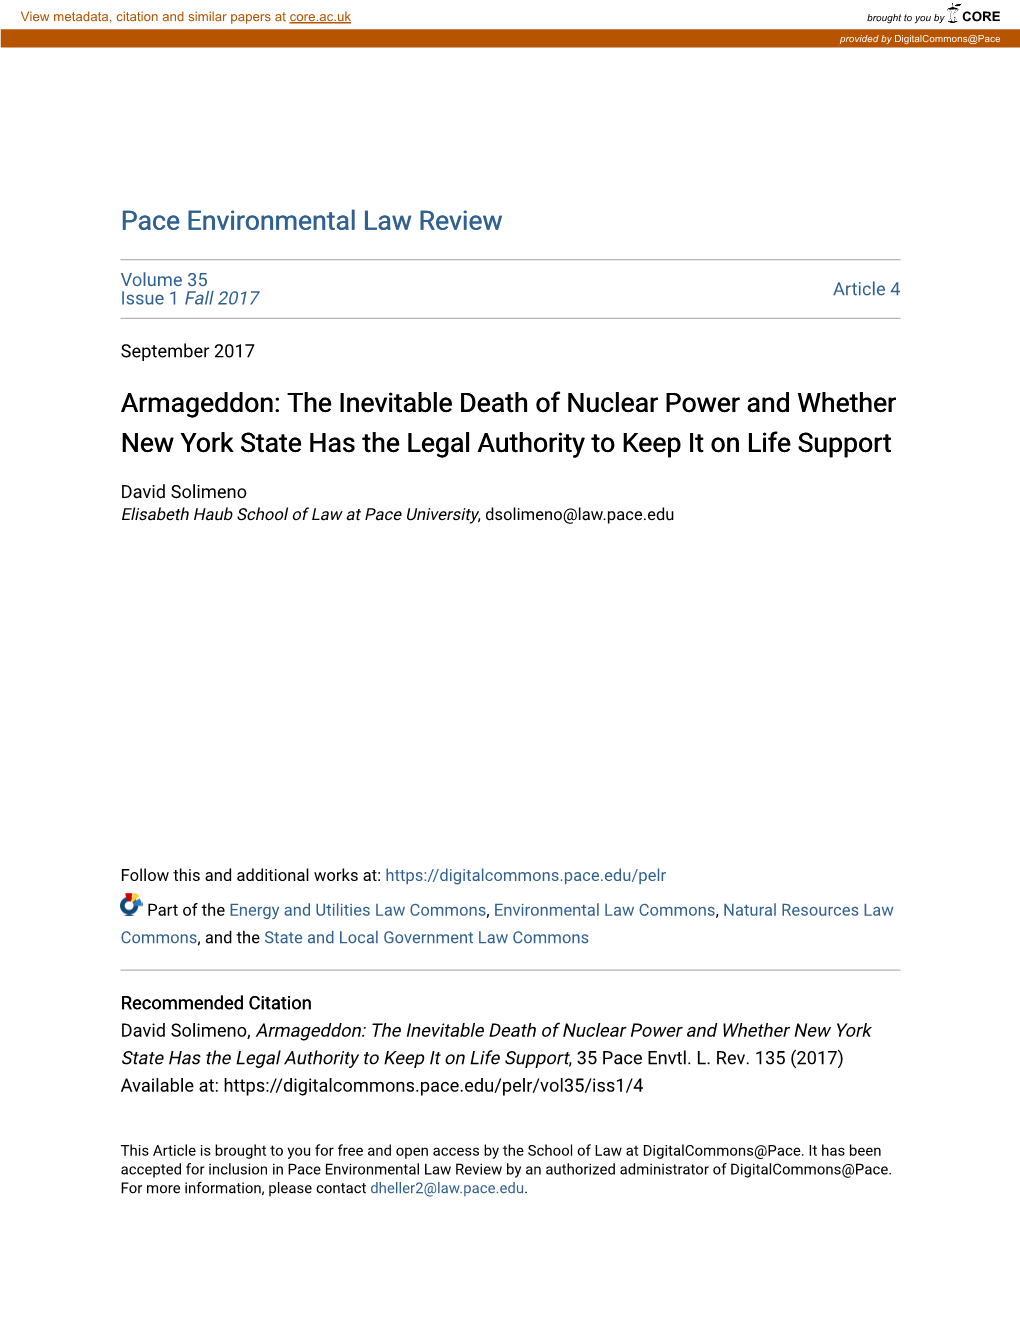 Armageddon: the Inevitable Death of Nuclear Power and Whether New York State Has the Legal Authority to Keep It on Life Support